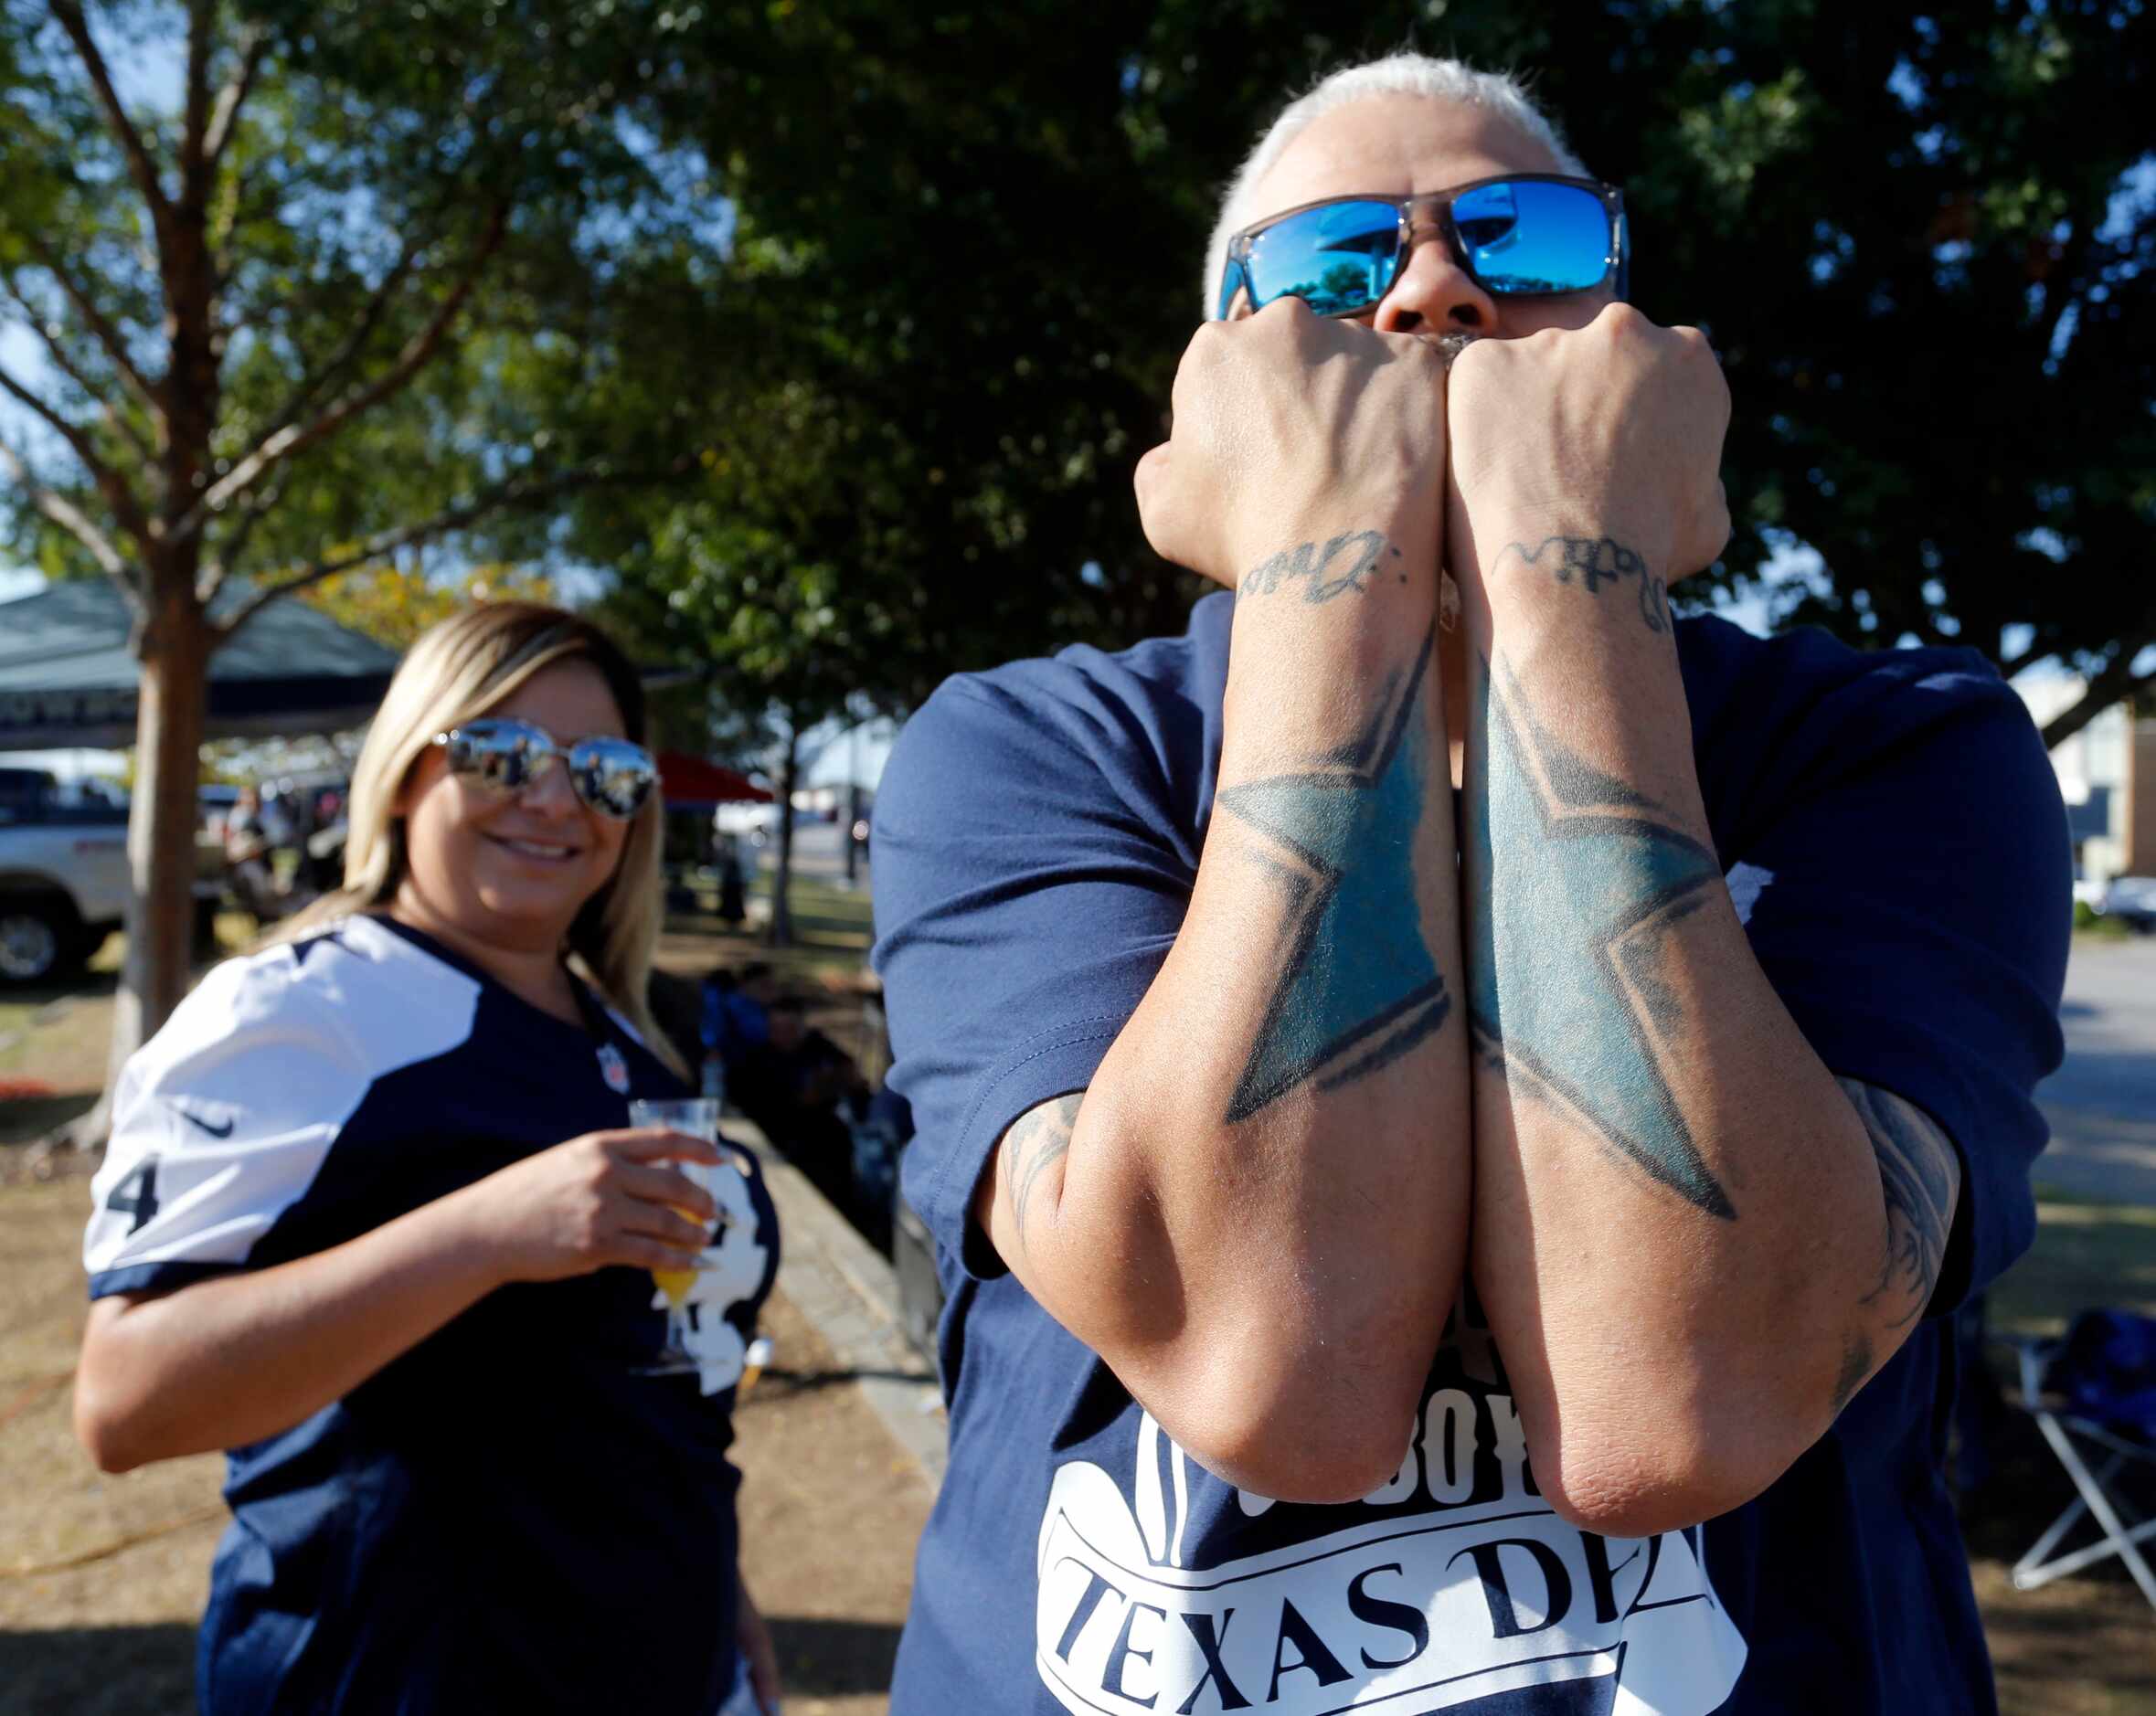 Nancy Lara, of Duncanville, watches friend Chis Palacio, of Ft. Worth, display his Dallas...